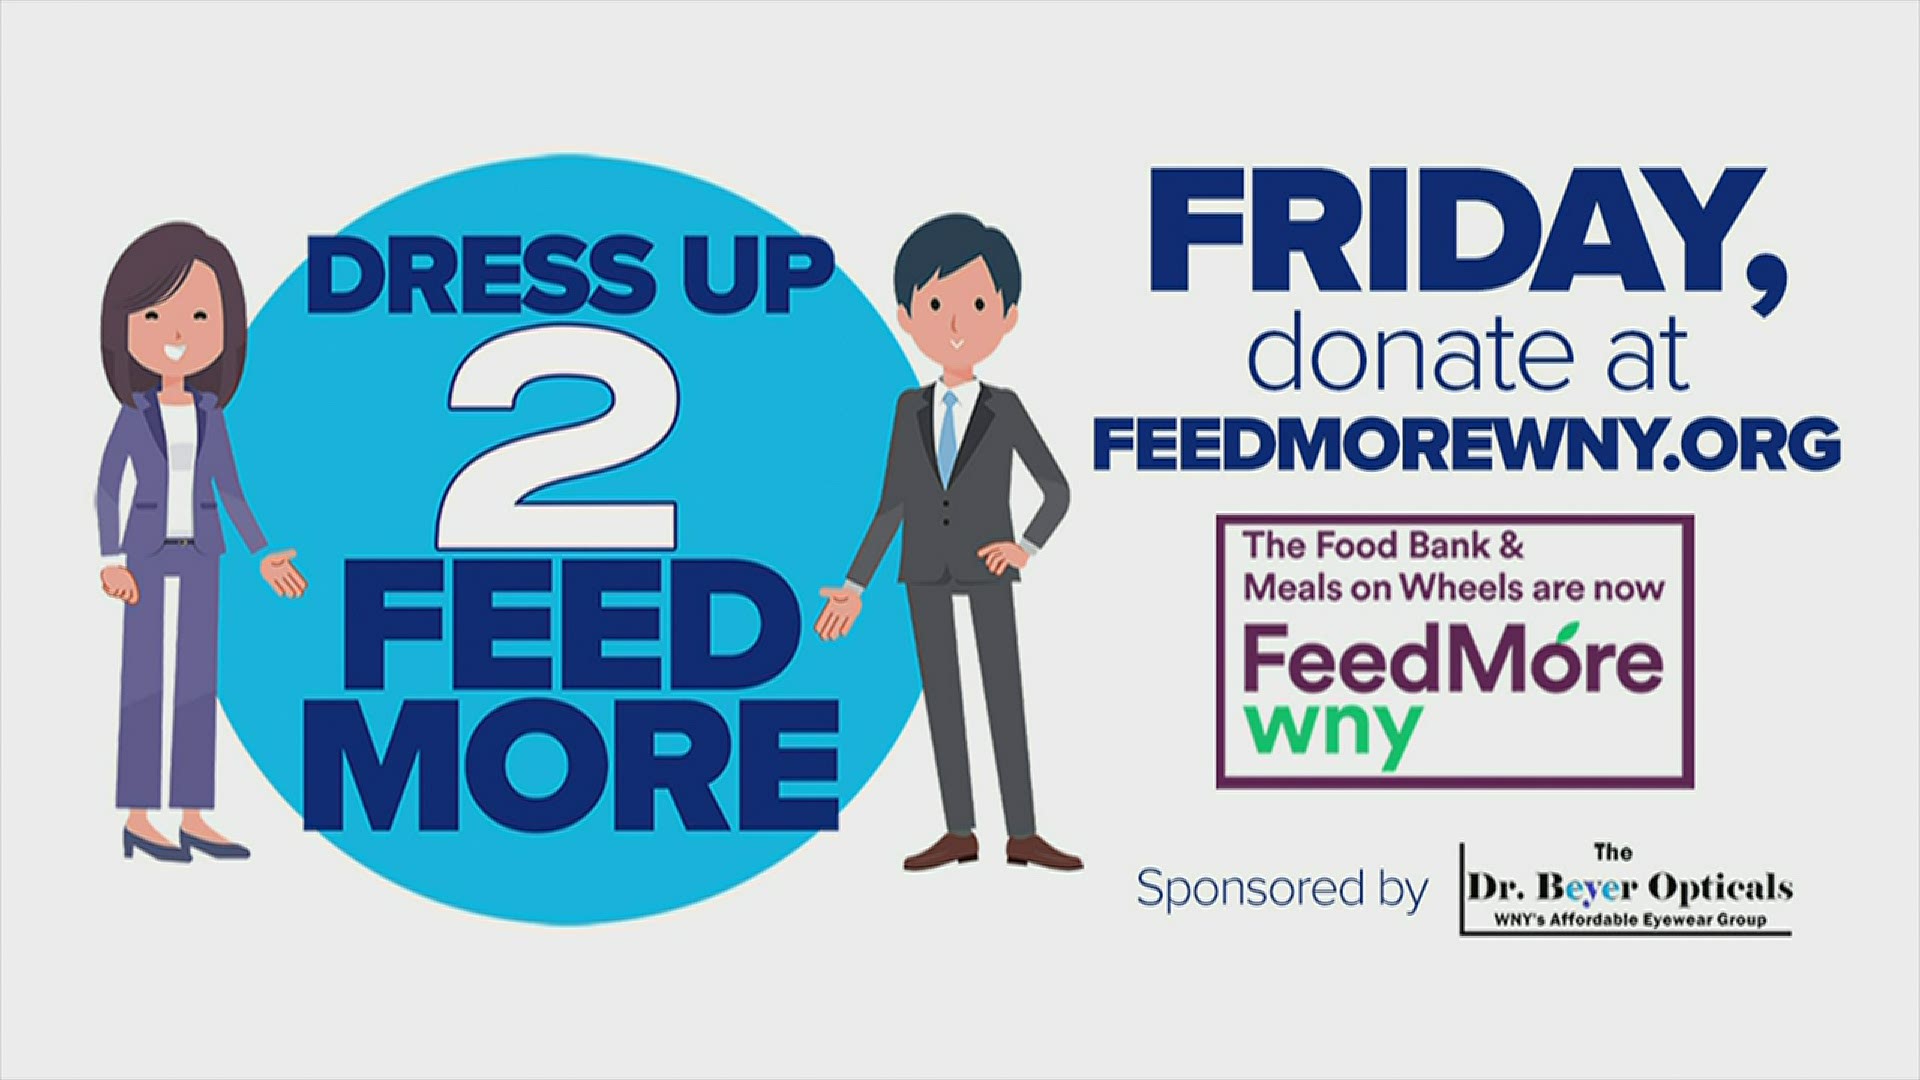 We're encouraging our viewers to dress up for work that day... in your best... and make a donation to Feedmore Western New York..